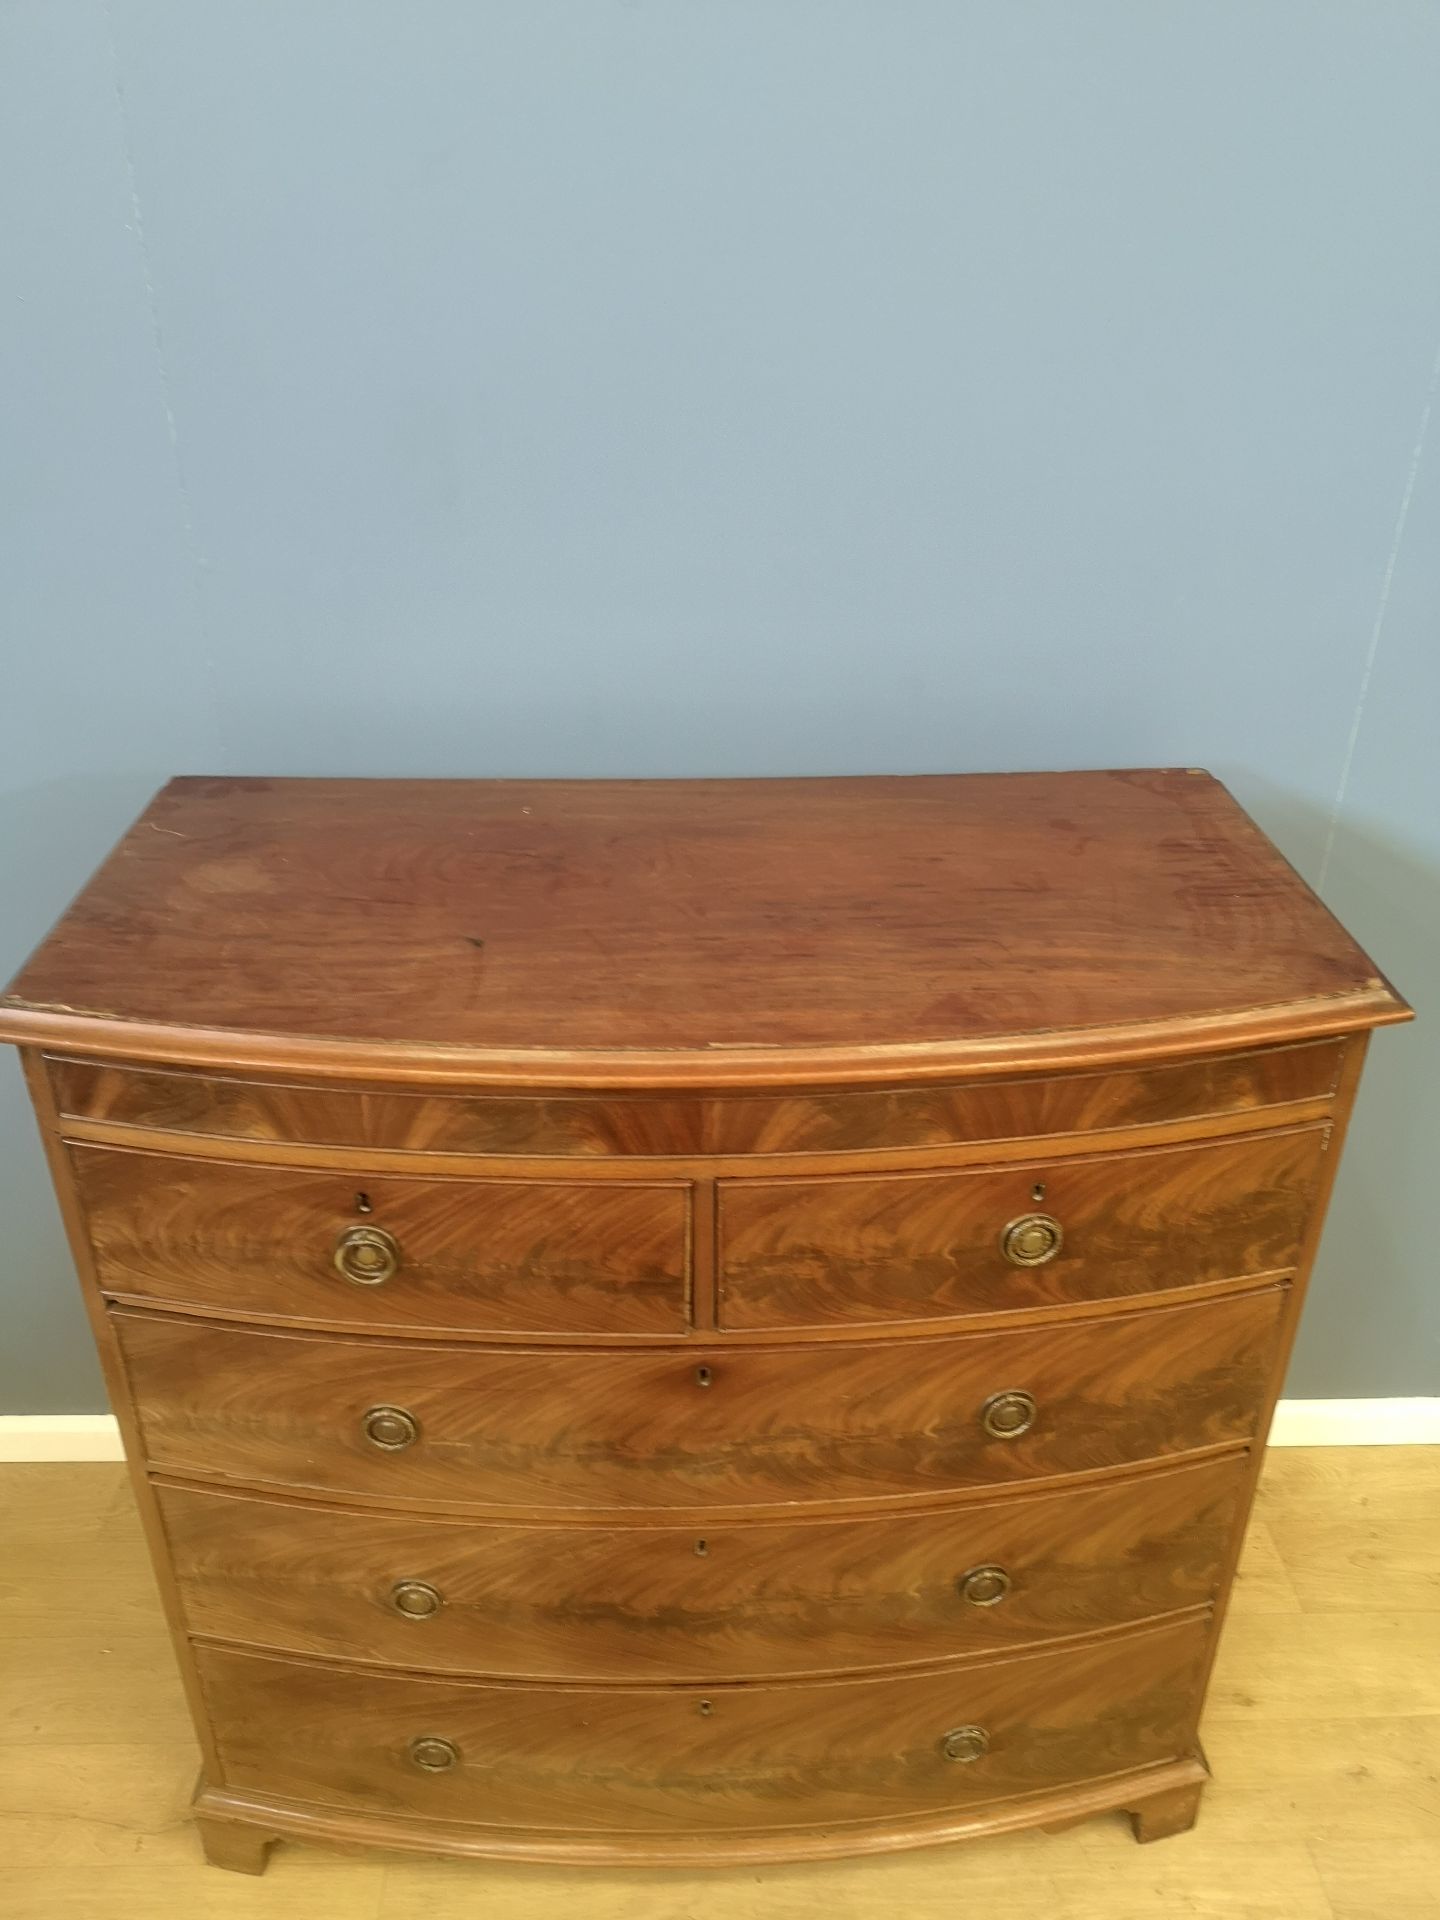 Mahogany bow fronted chest of drawers - Image 2 of 6